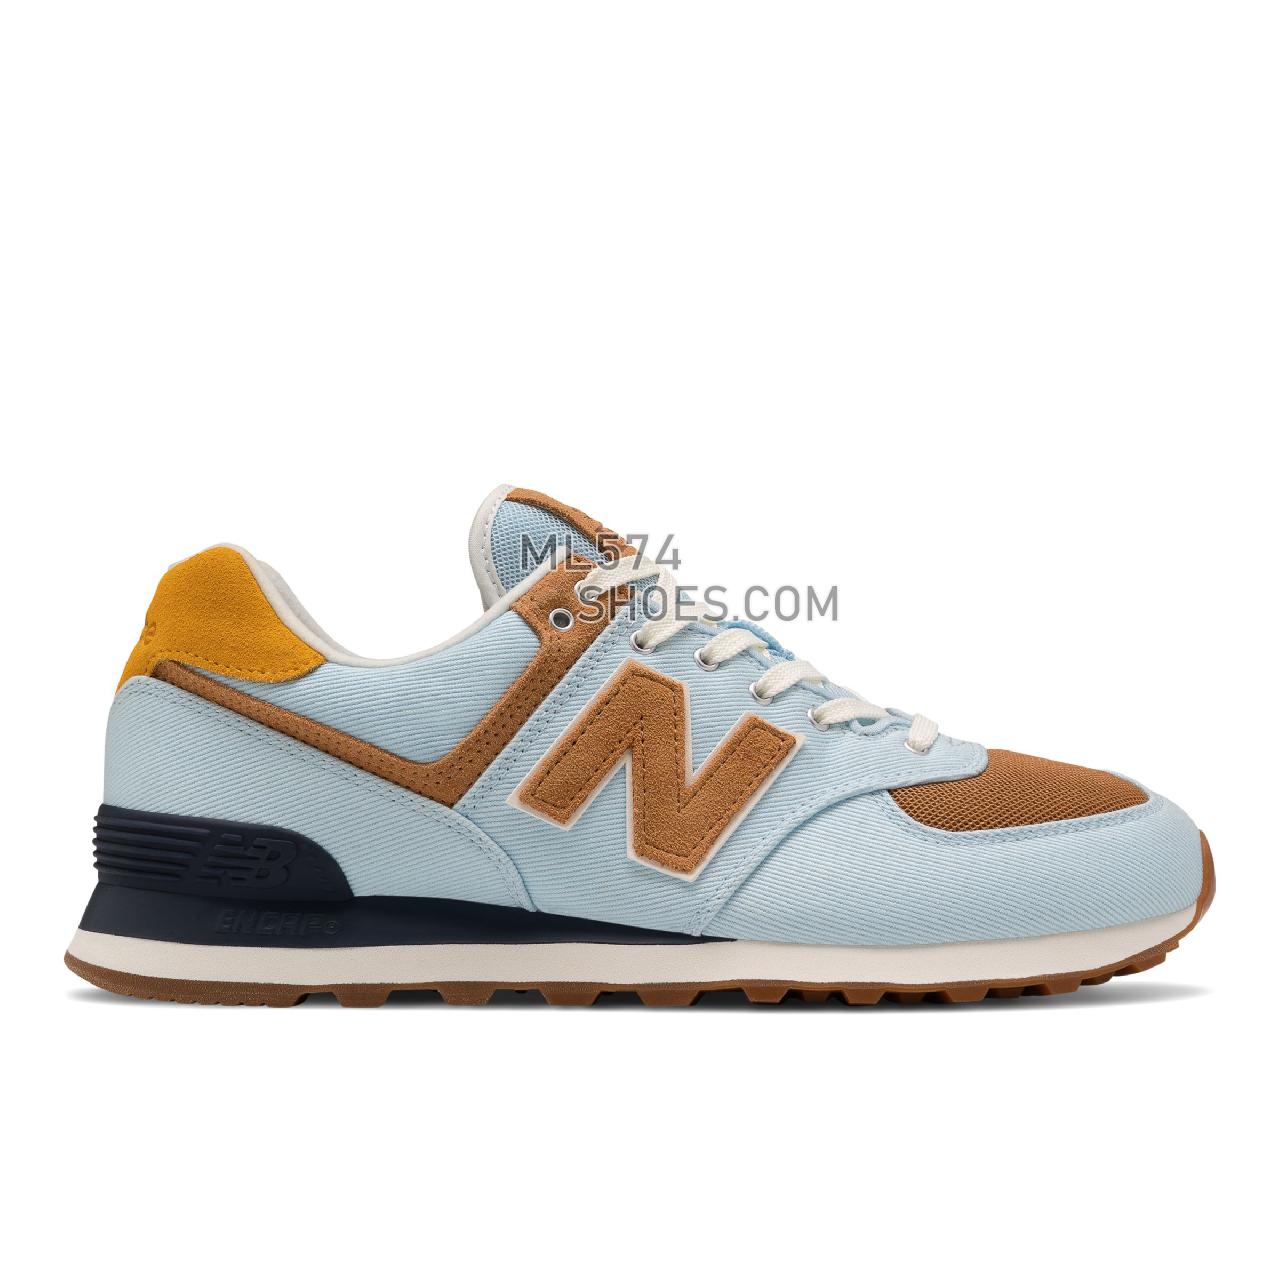 New Balance 574v2 Denim - Men's Classic Sneakers - Uv Glo with Faded Workwear - ML574DS2